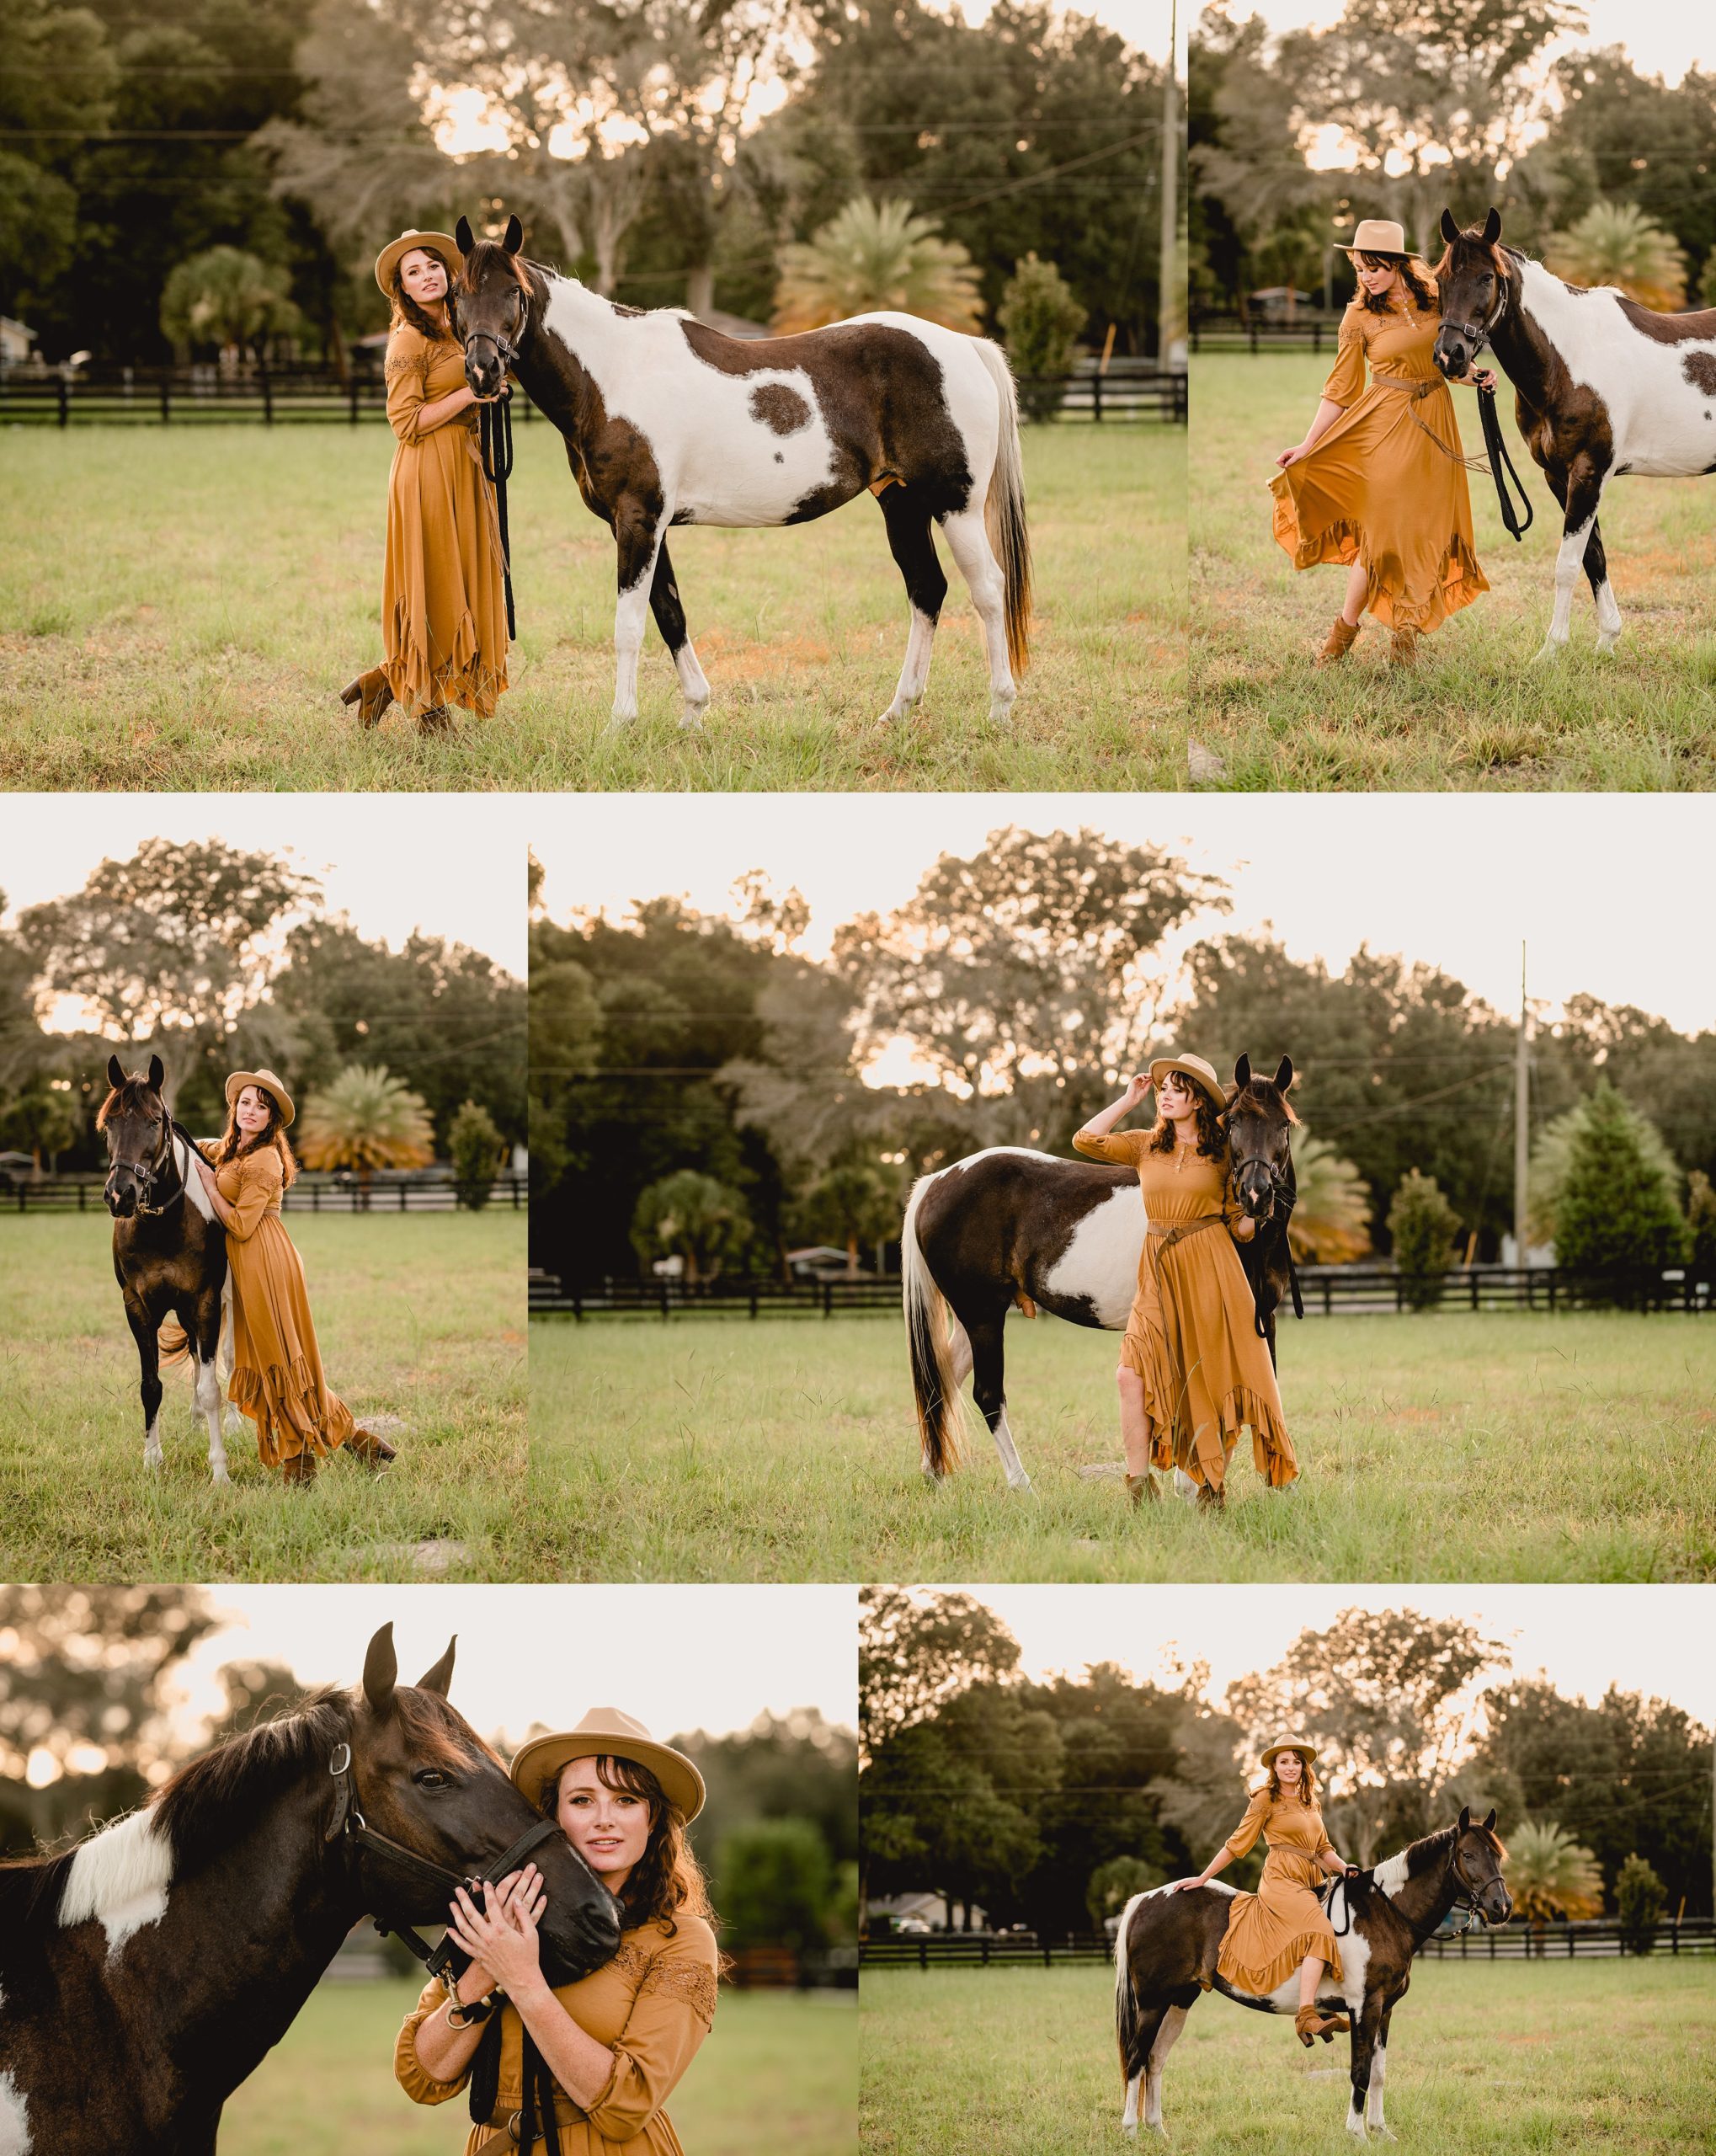 Beautiful sunset photos with girl in yellow dress and APHA gelding.